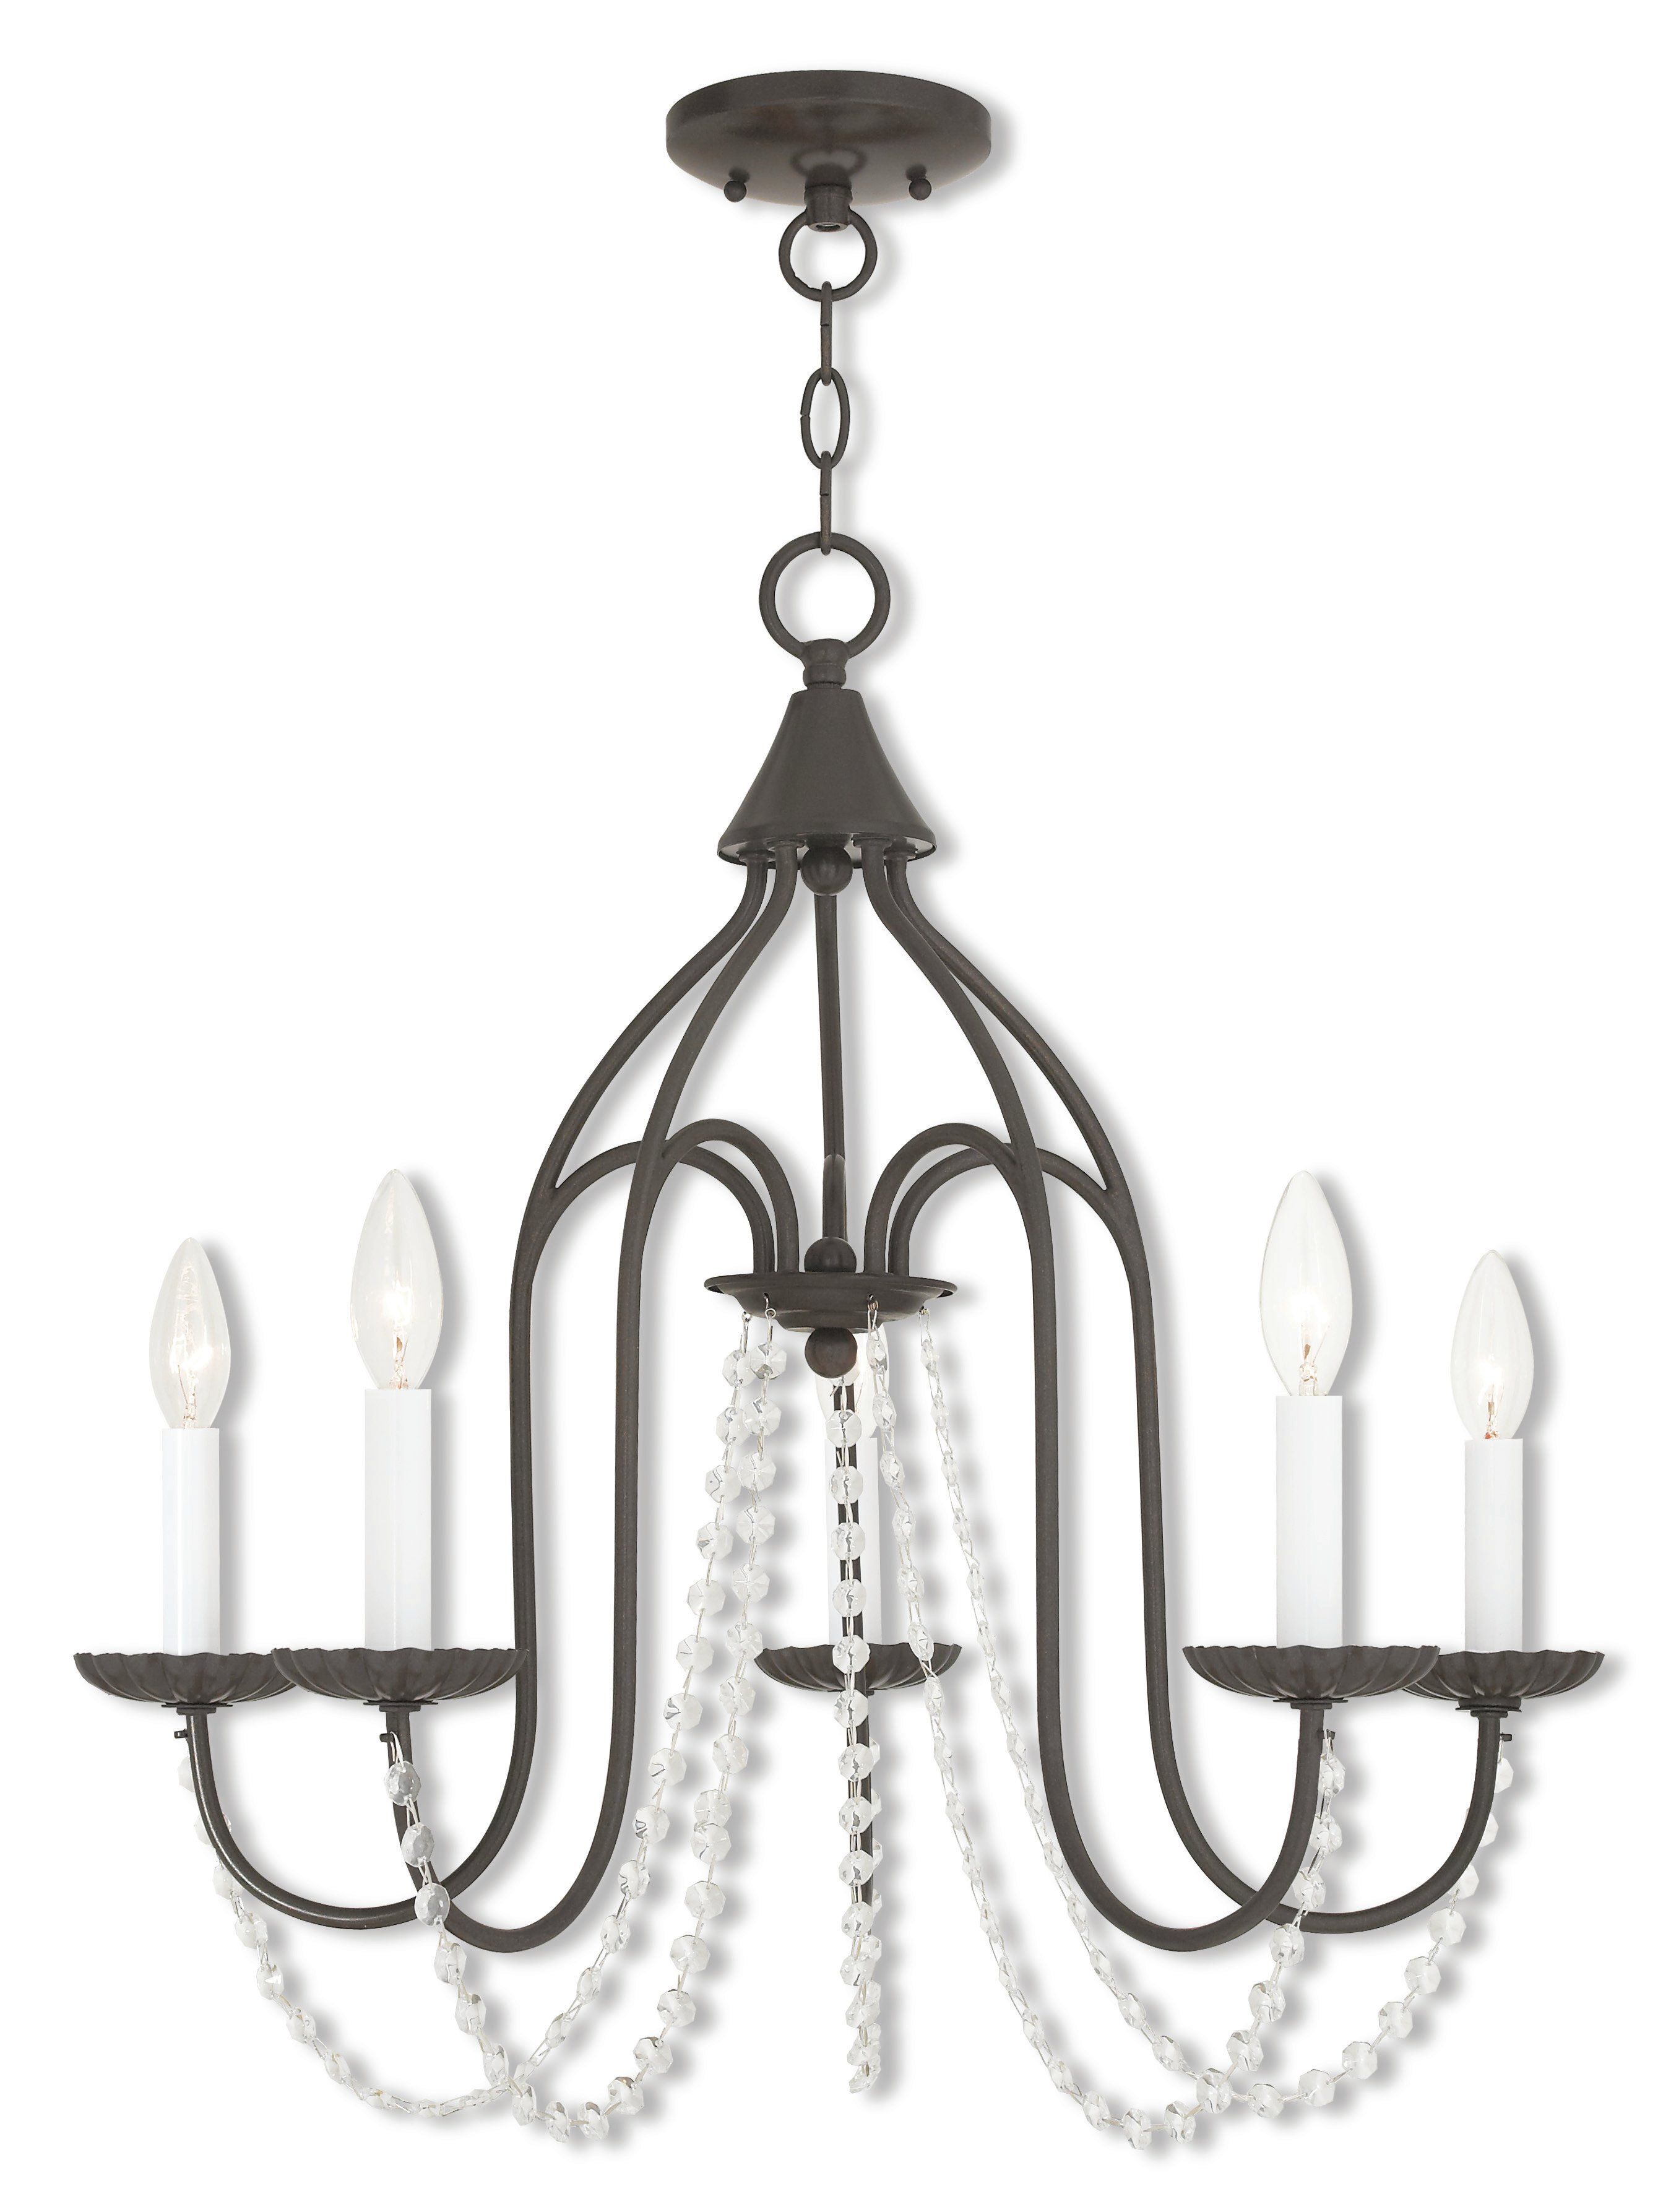 Florentina 5 Light Candle Style Chandelier Regarding Watford 6 Light Candle Style Chandeliers (View 27 of 30)